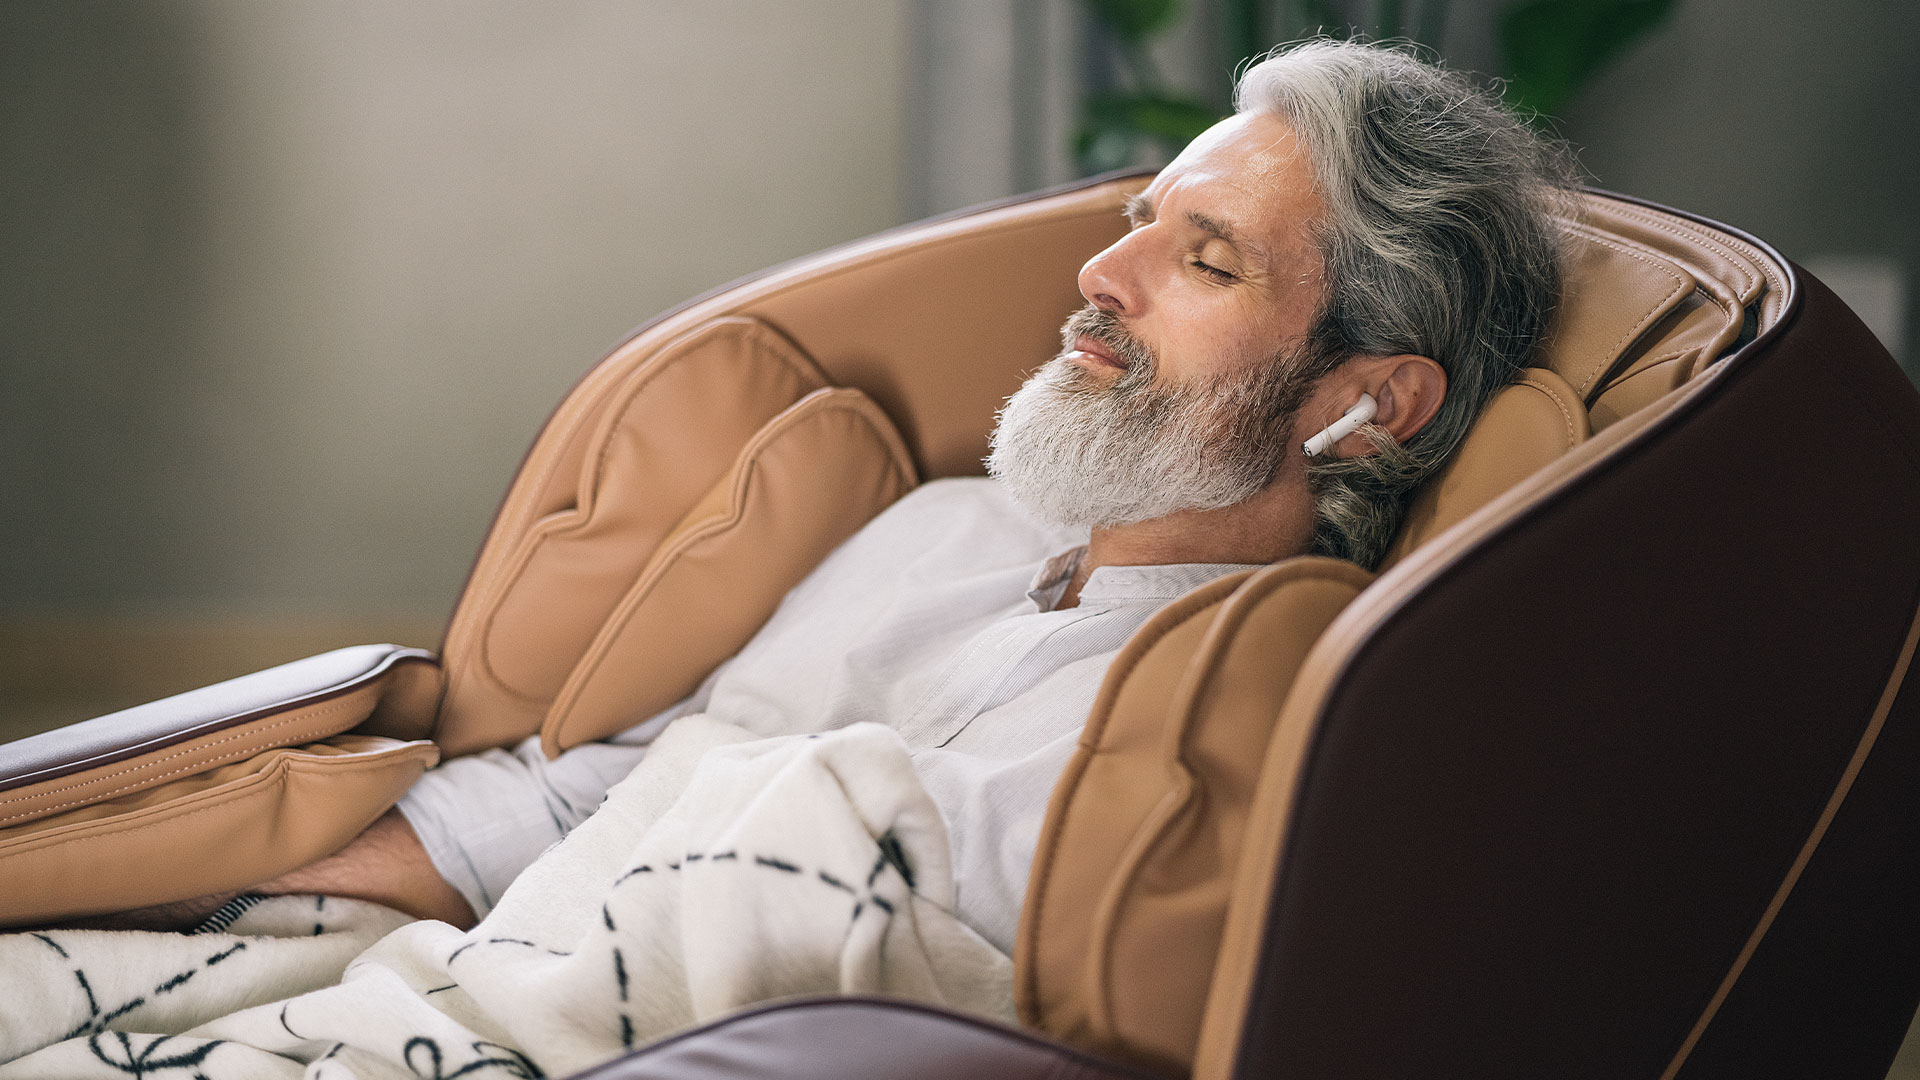 How to increase the comfort of a massage in a massage chair?